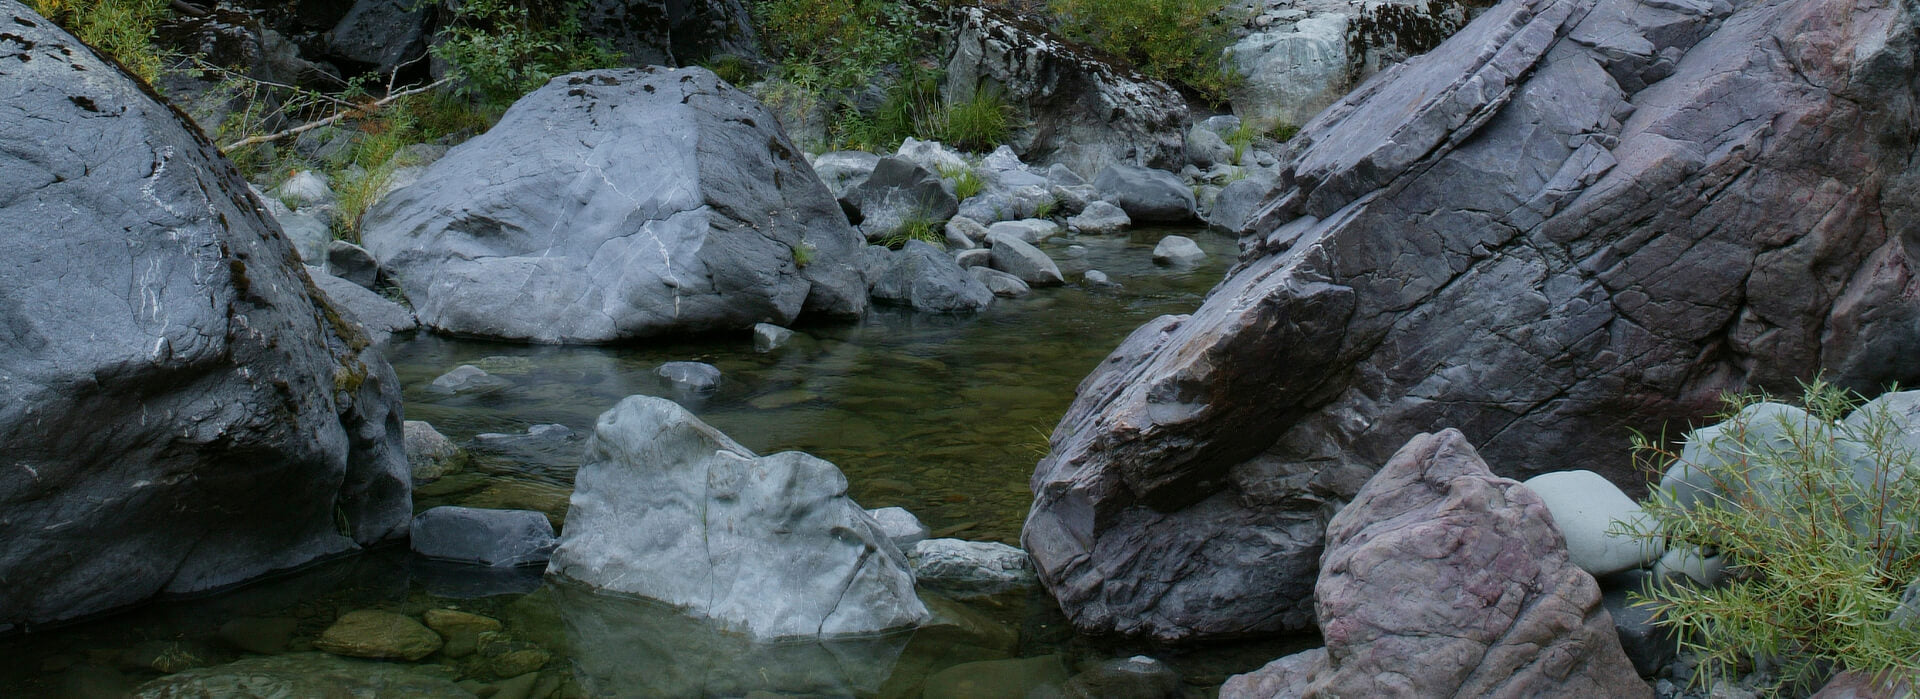 Colored rocks and boulders in river gorge, Trinity Mountain wilderness, California.